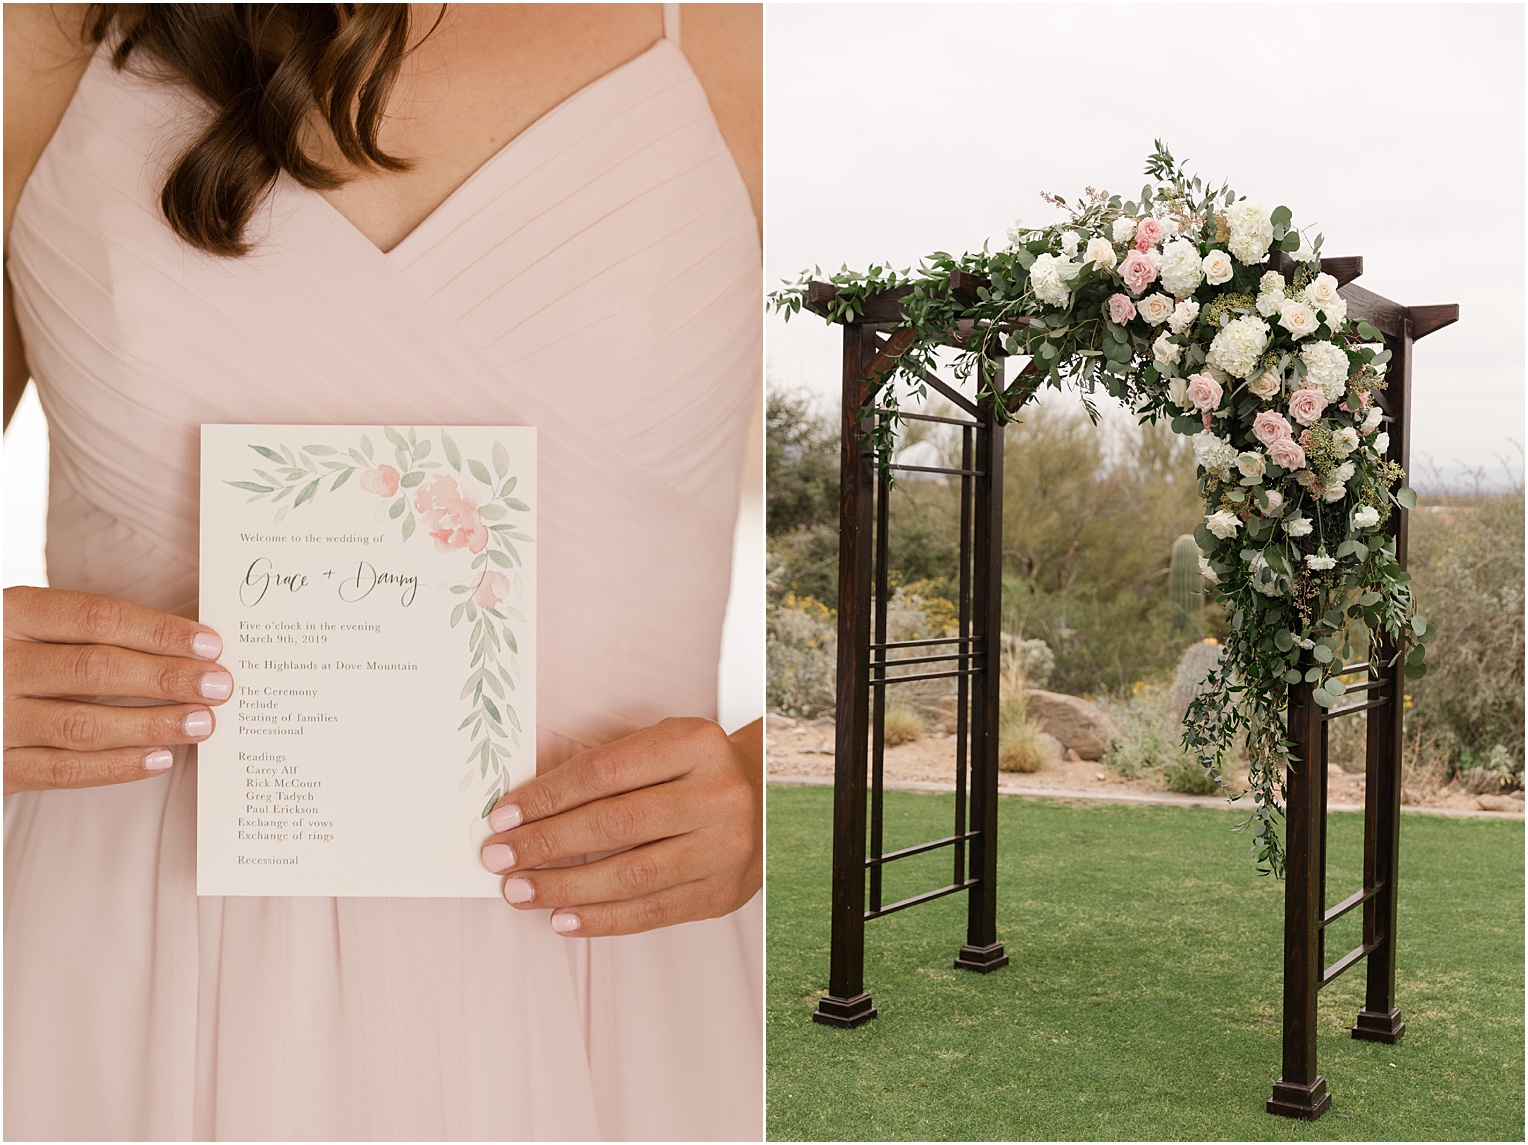 Highlands at Dove Mountain Wedding Grace + Danny romantic outdoor blush ceremony with floral altar and invitation